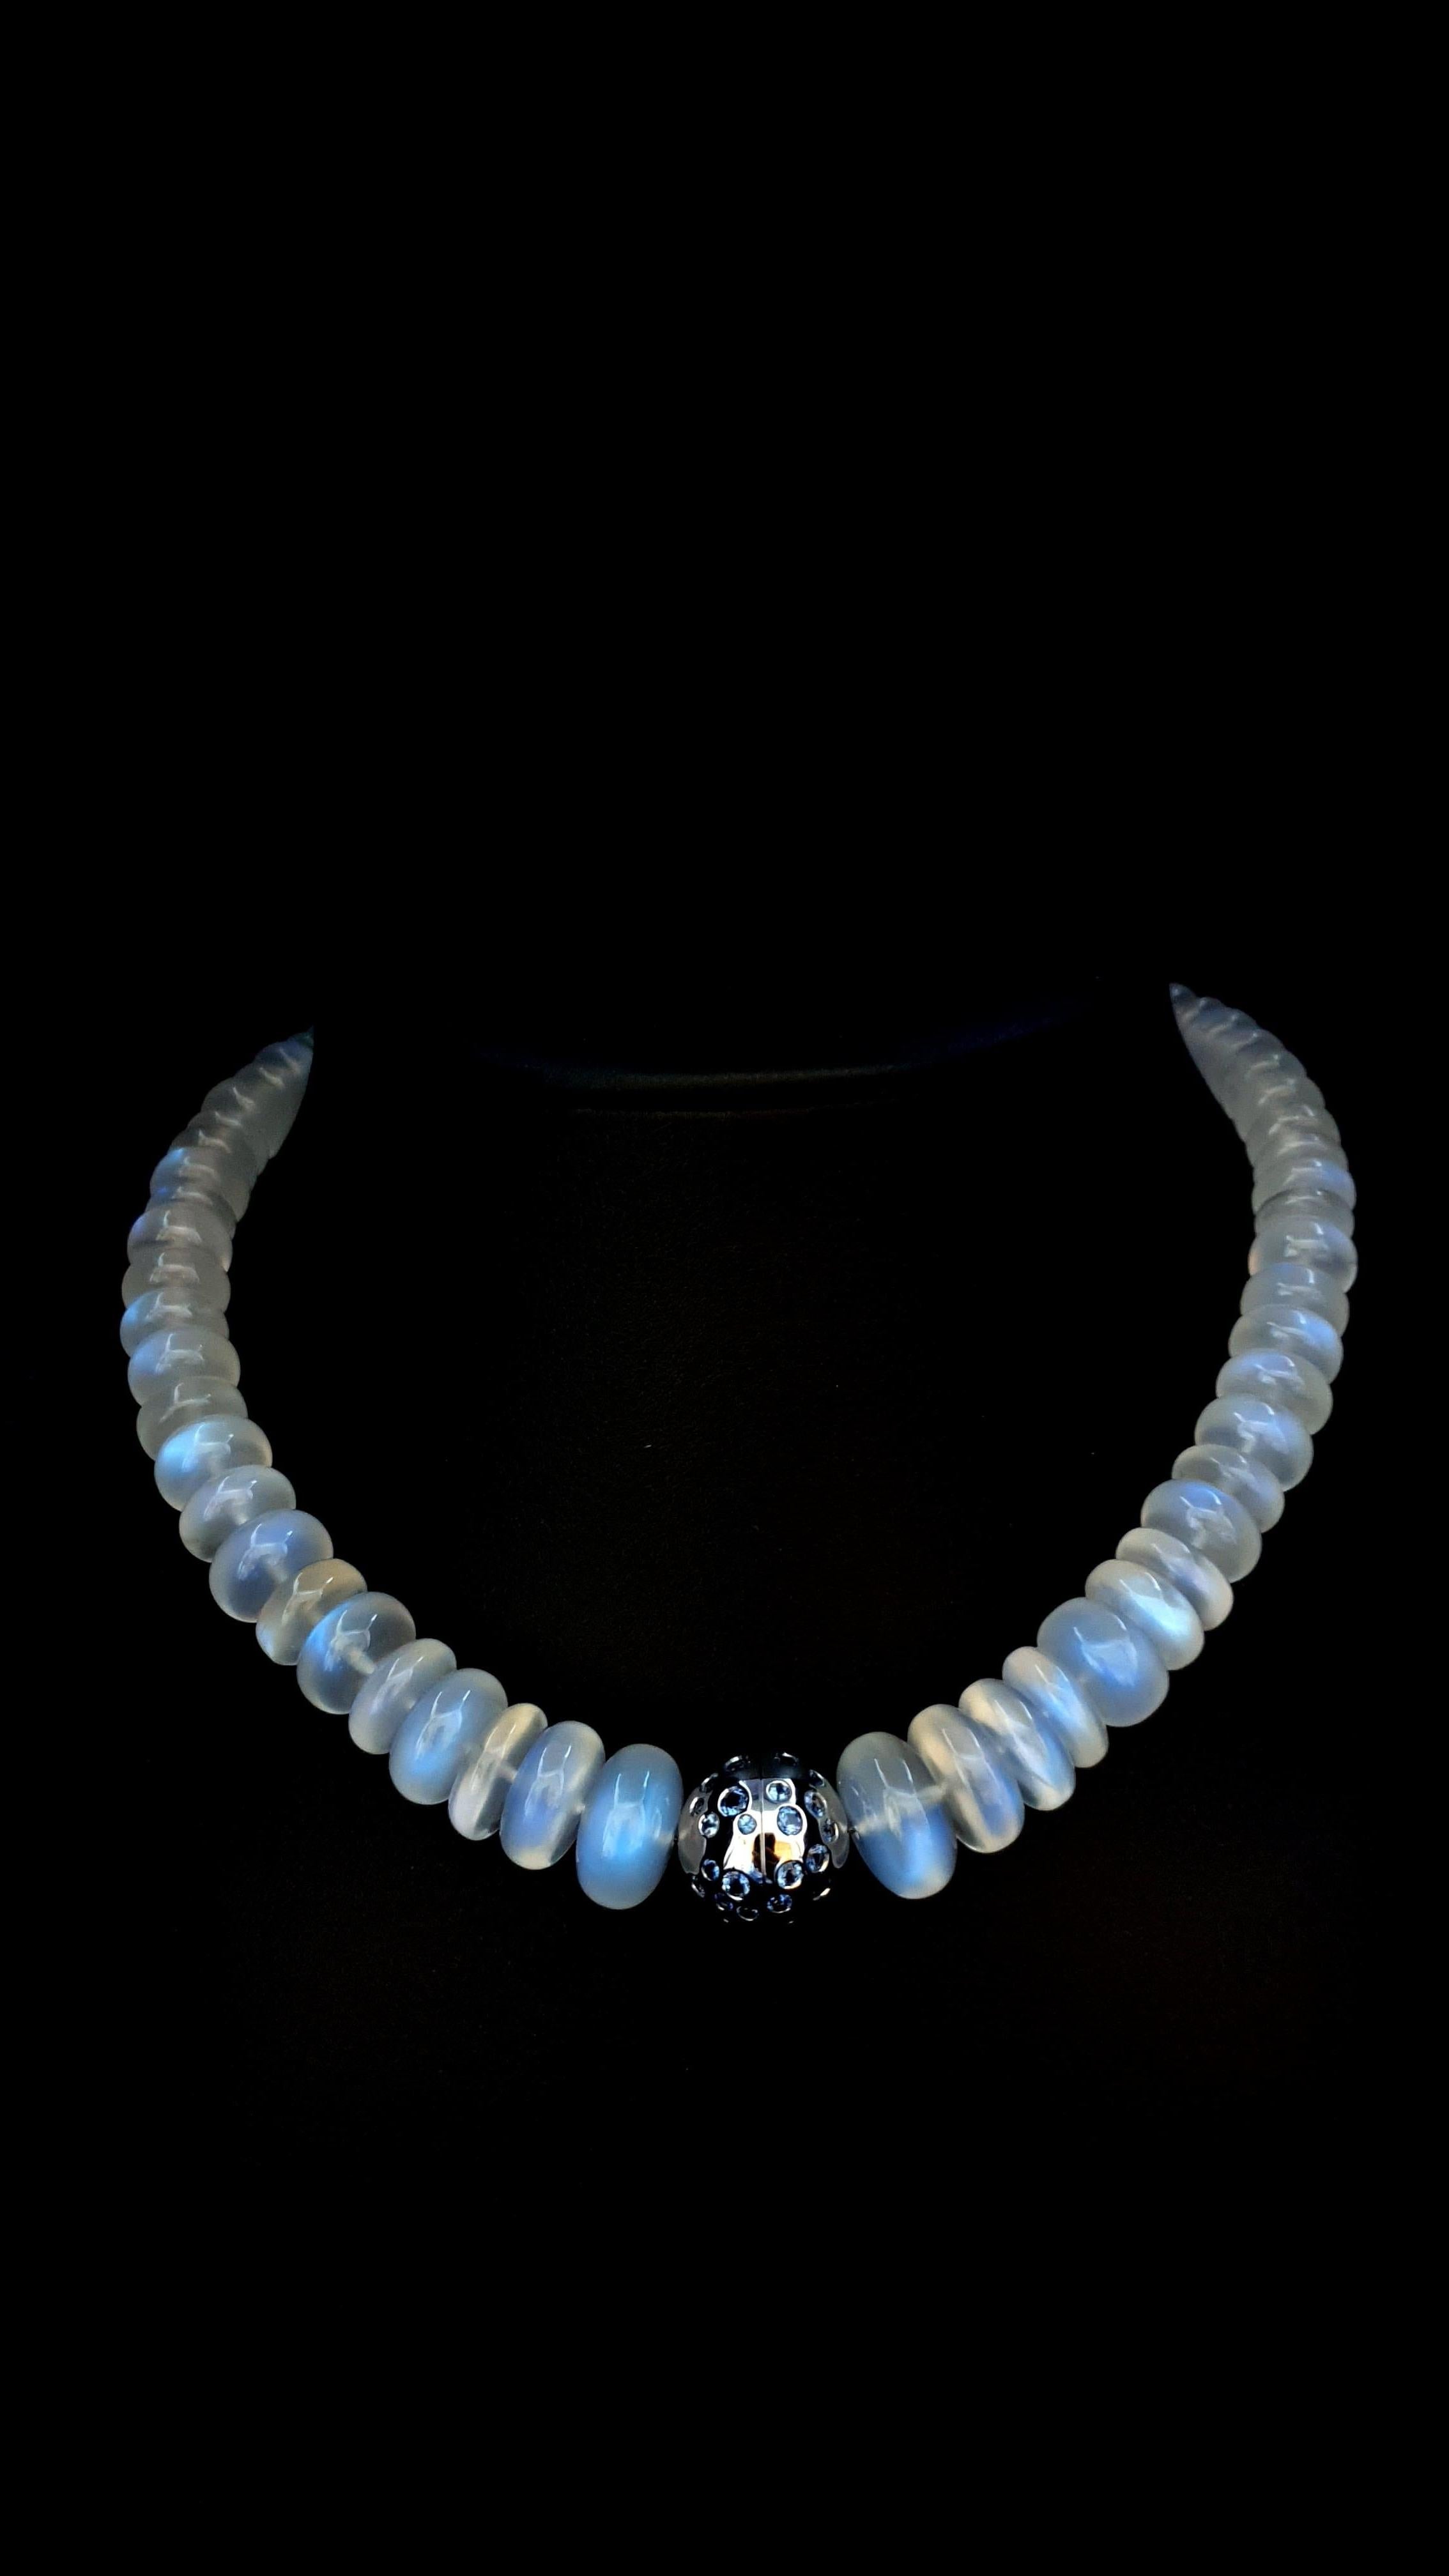 Women's Blue Moonstone Rondel Beaded Necklace with 18 Carat White Gold Sapphire Clasp For Sale